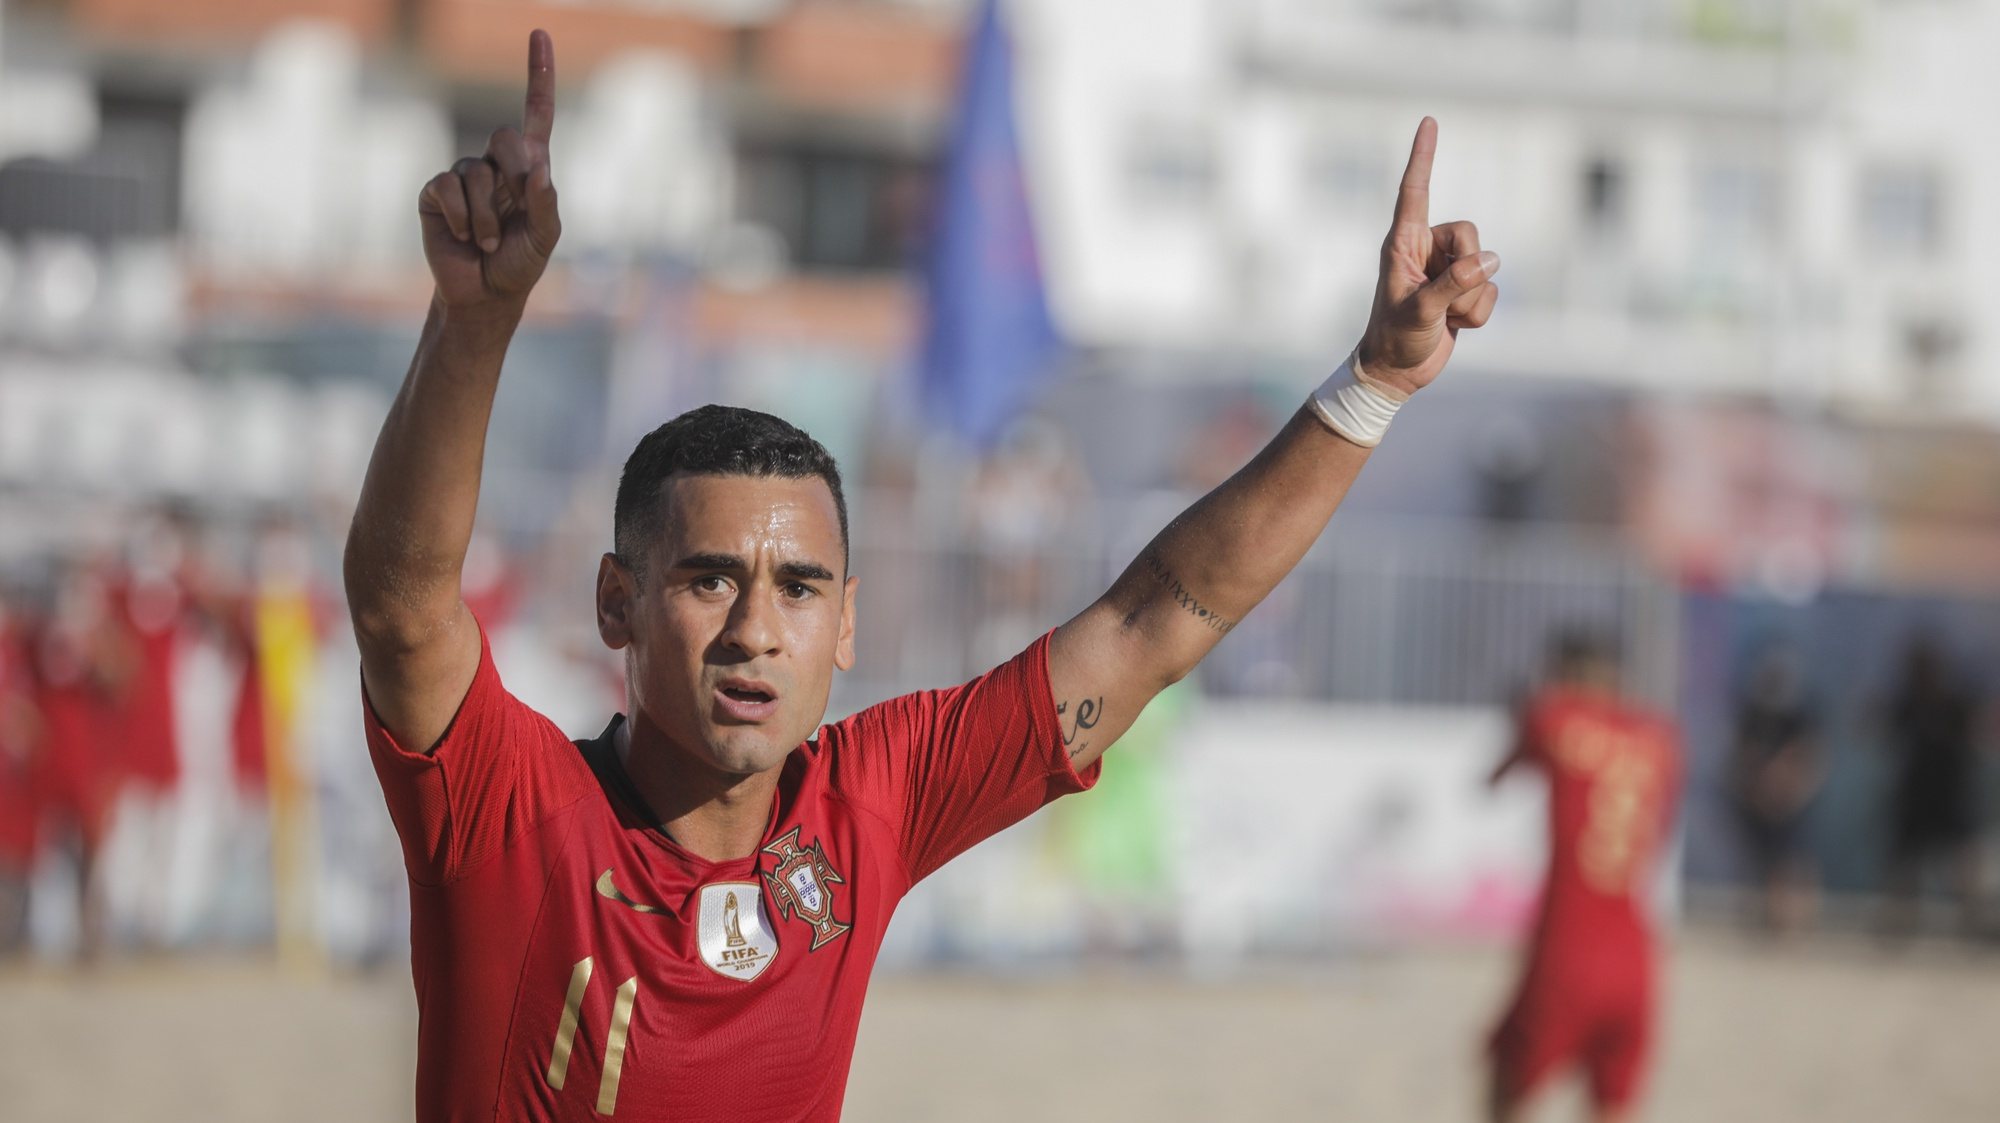 The player of the Portugal national team Leo Martins celebrates the scoring of a goal against the Swiss national team during the Superfinal of the European Beach Soccer League held at Nazare, Portugal, 6th September 2020. PAULO CUNHA/LUSA